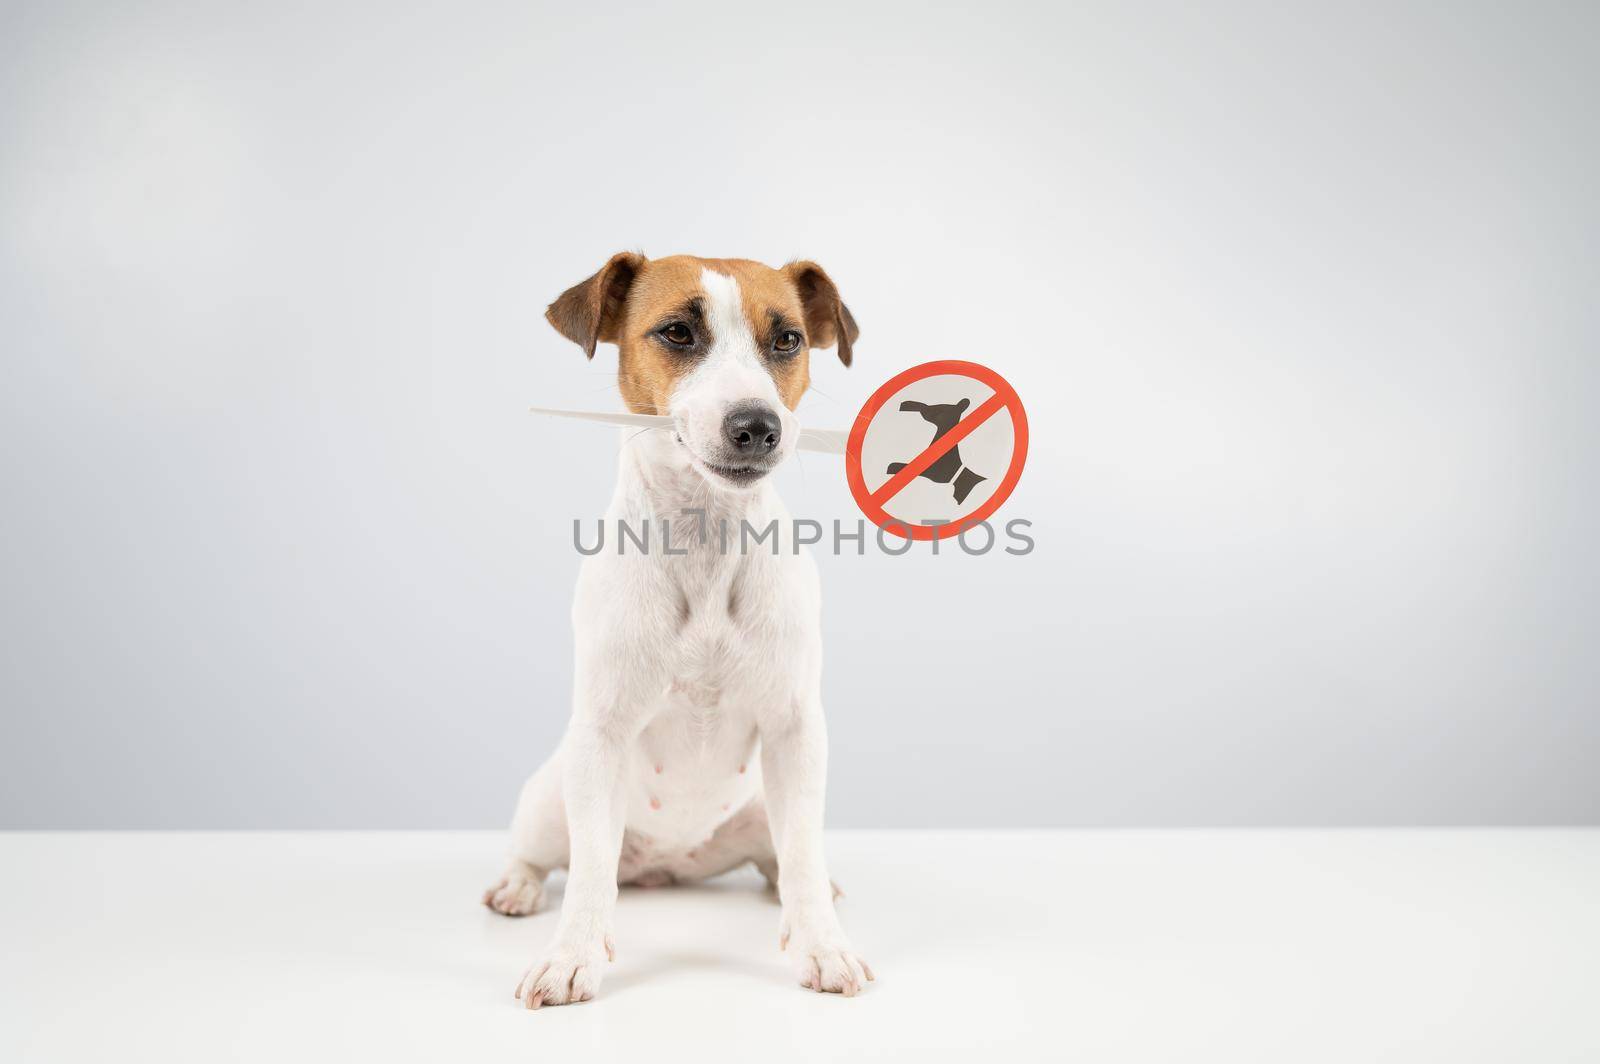 Dog jack russell terrier holding a sign dogs are not allowed on a white background. by mrwed54